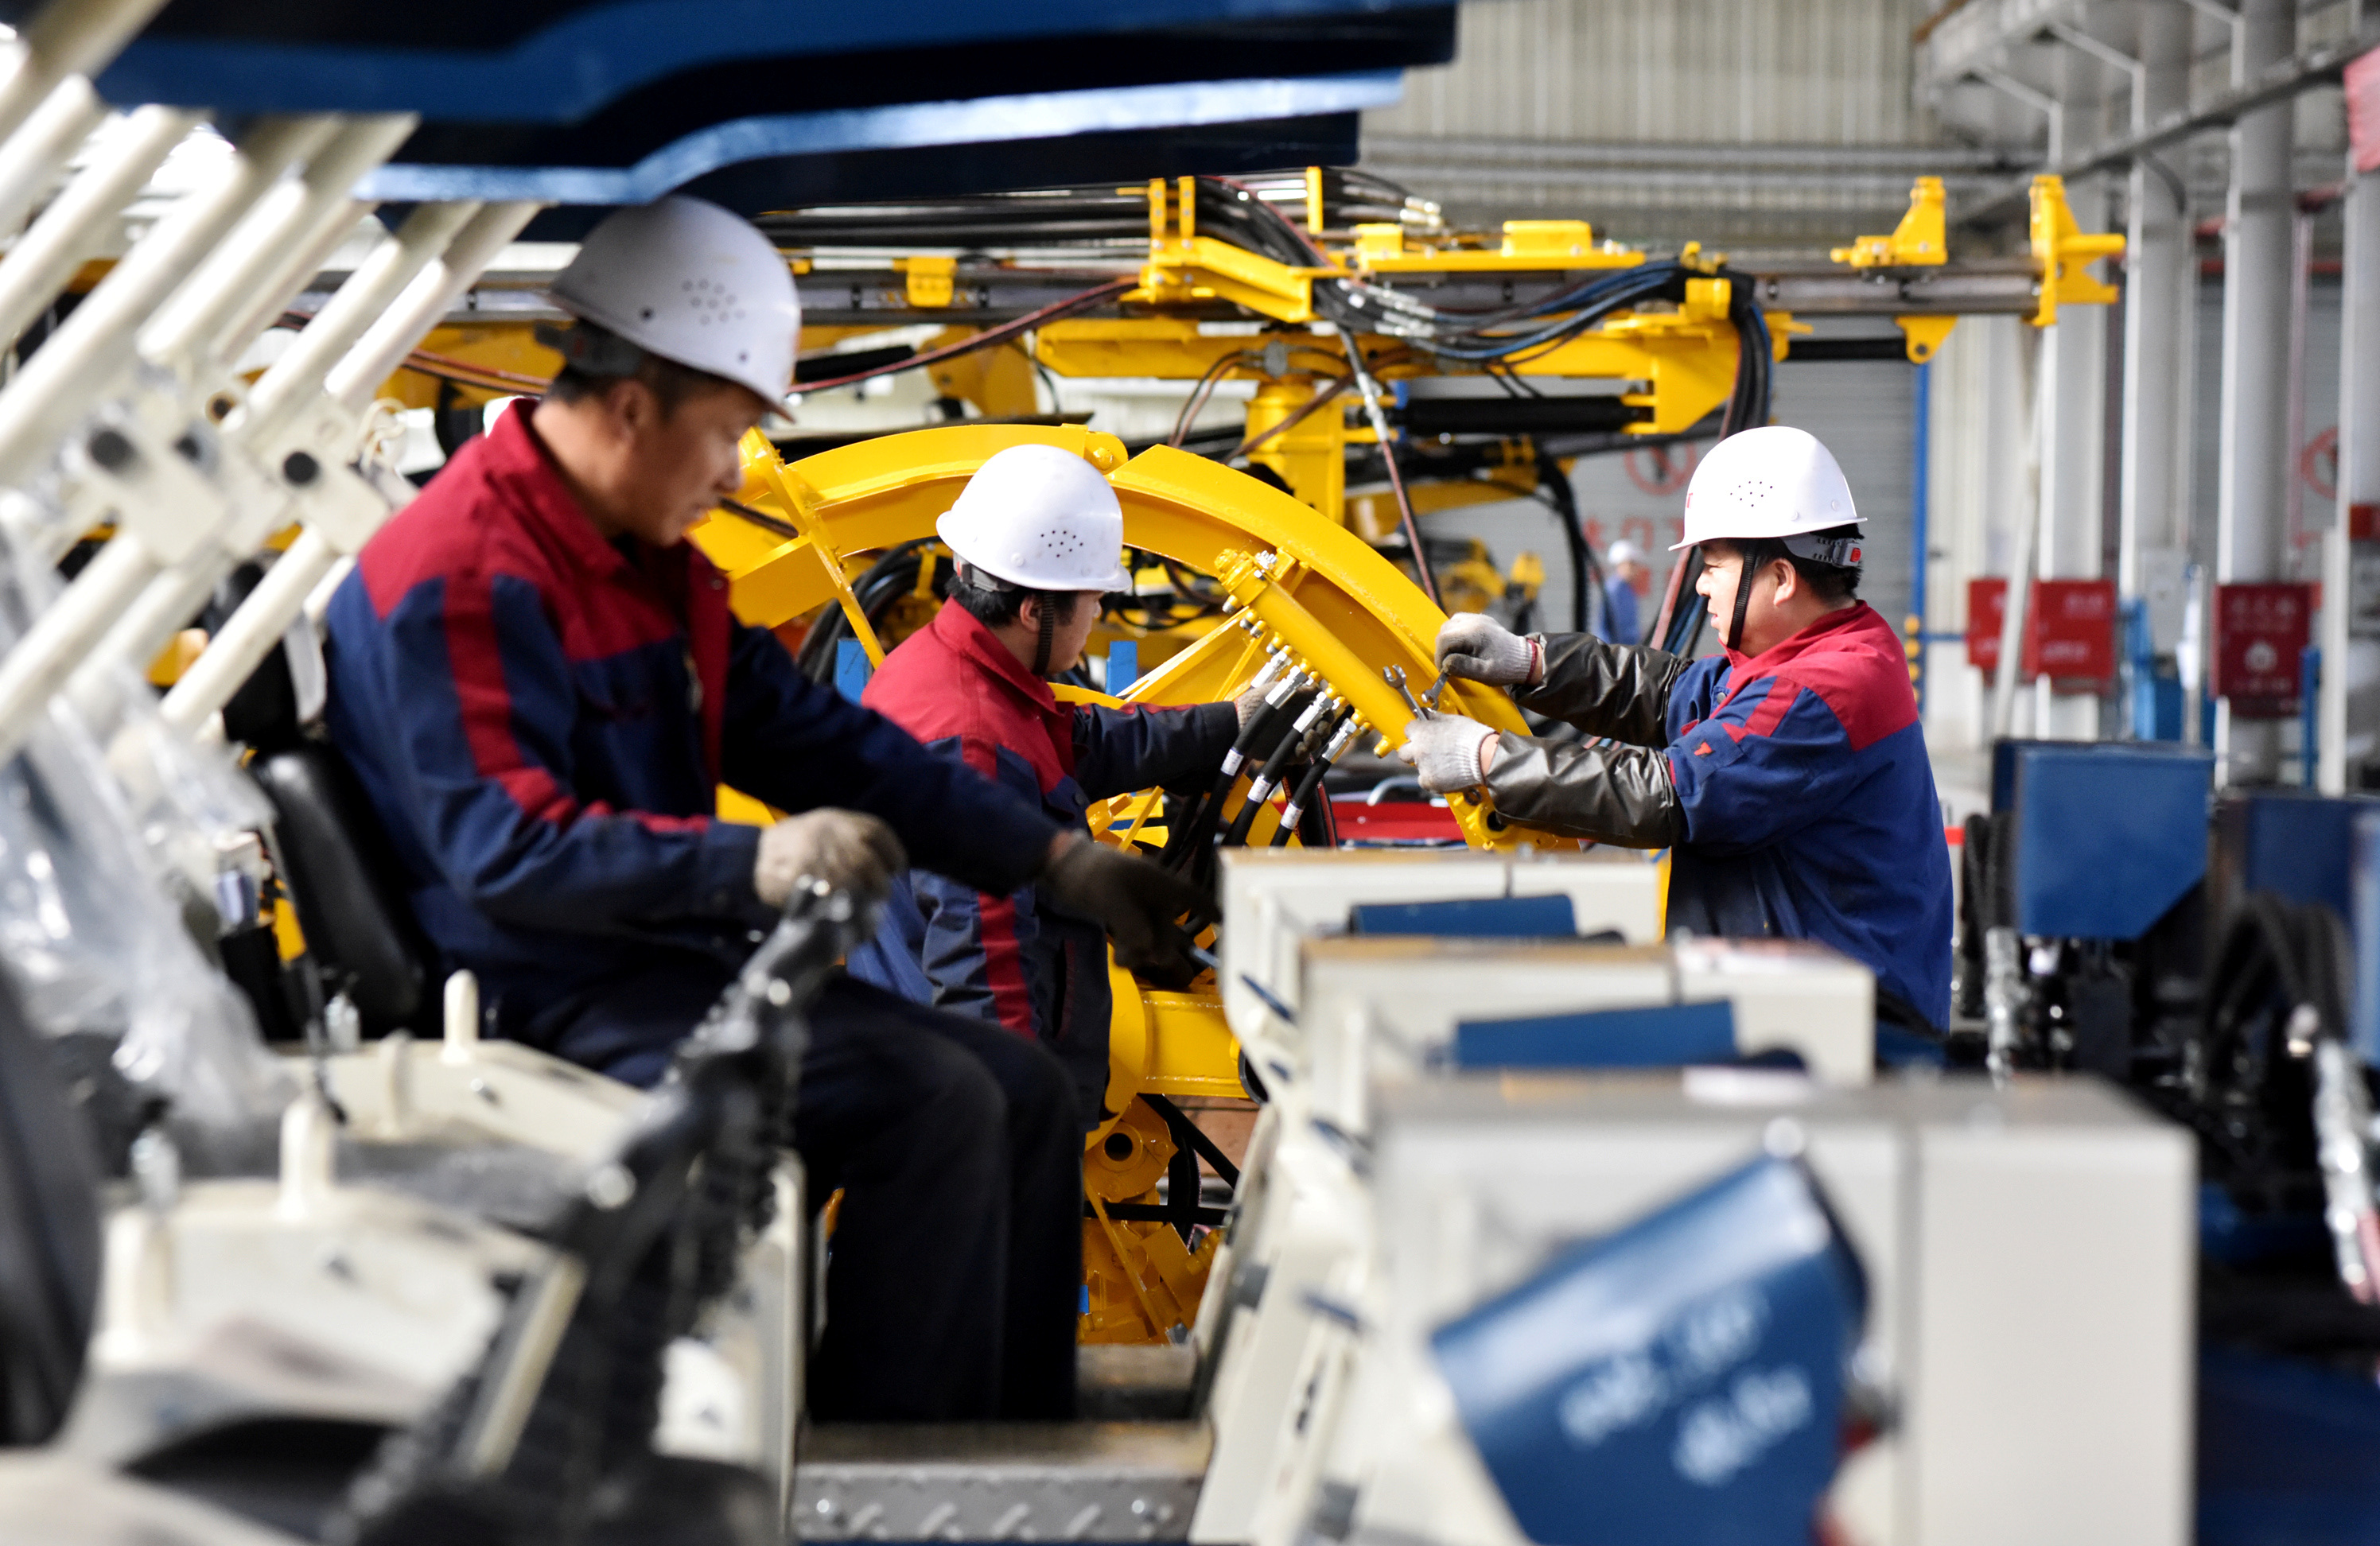 Employees work on a drilling machine production line at a factory in Zhangjiakou